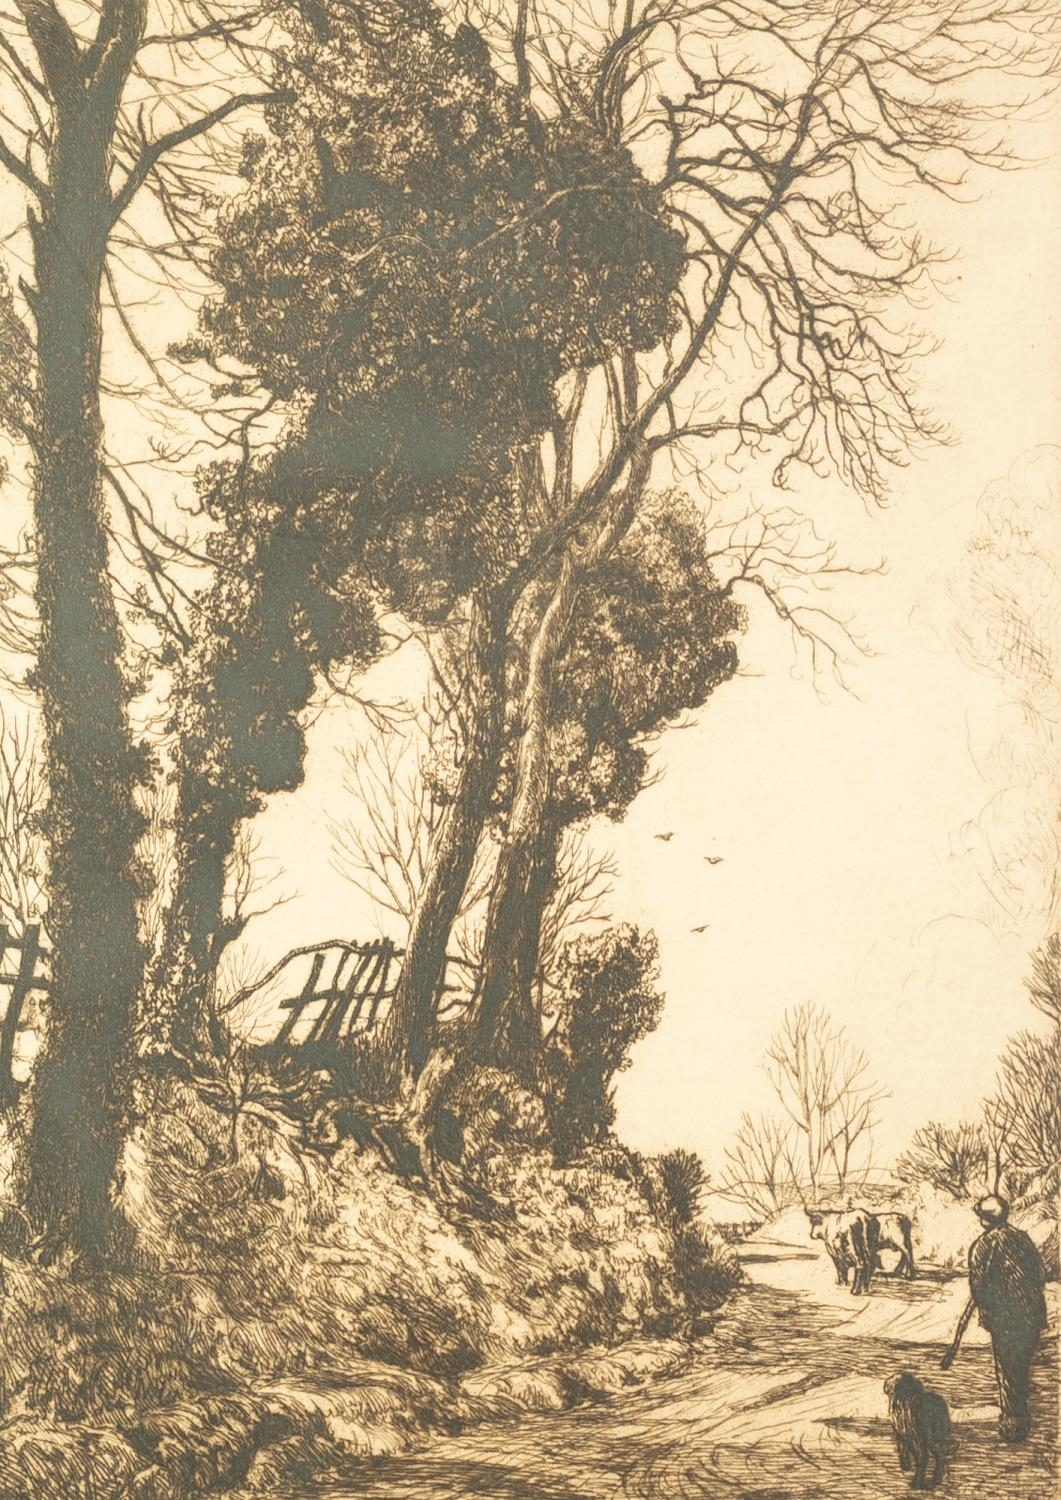 JOSEPH  KNIGHT (1837-1909)  ETCHING  Country lane with figure, dog and cows Signed in pencil  12"